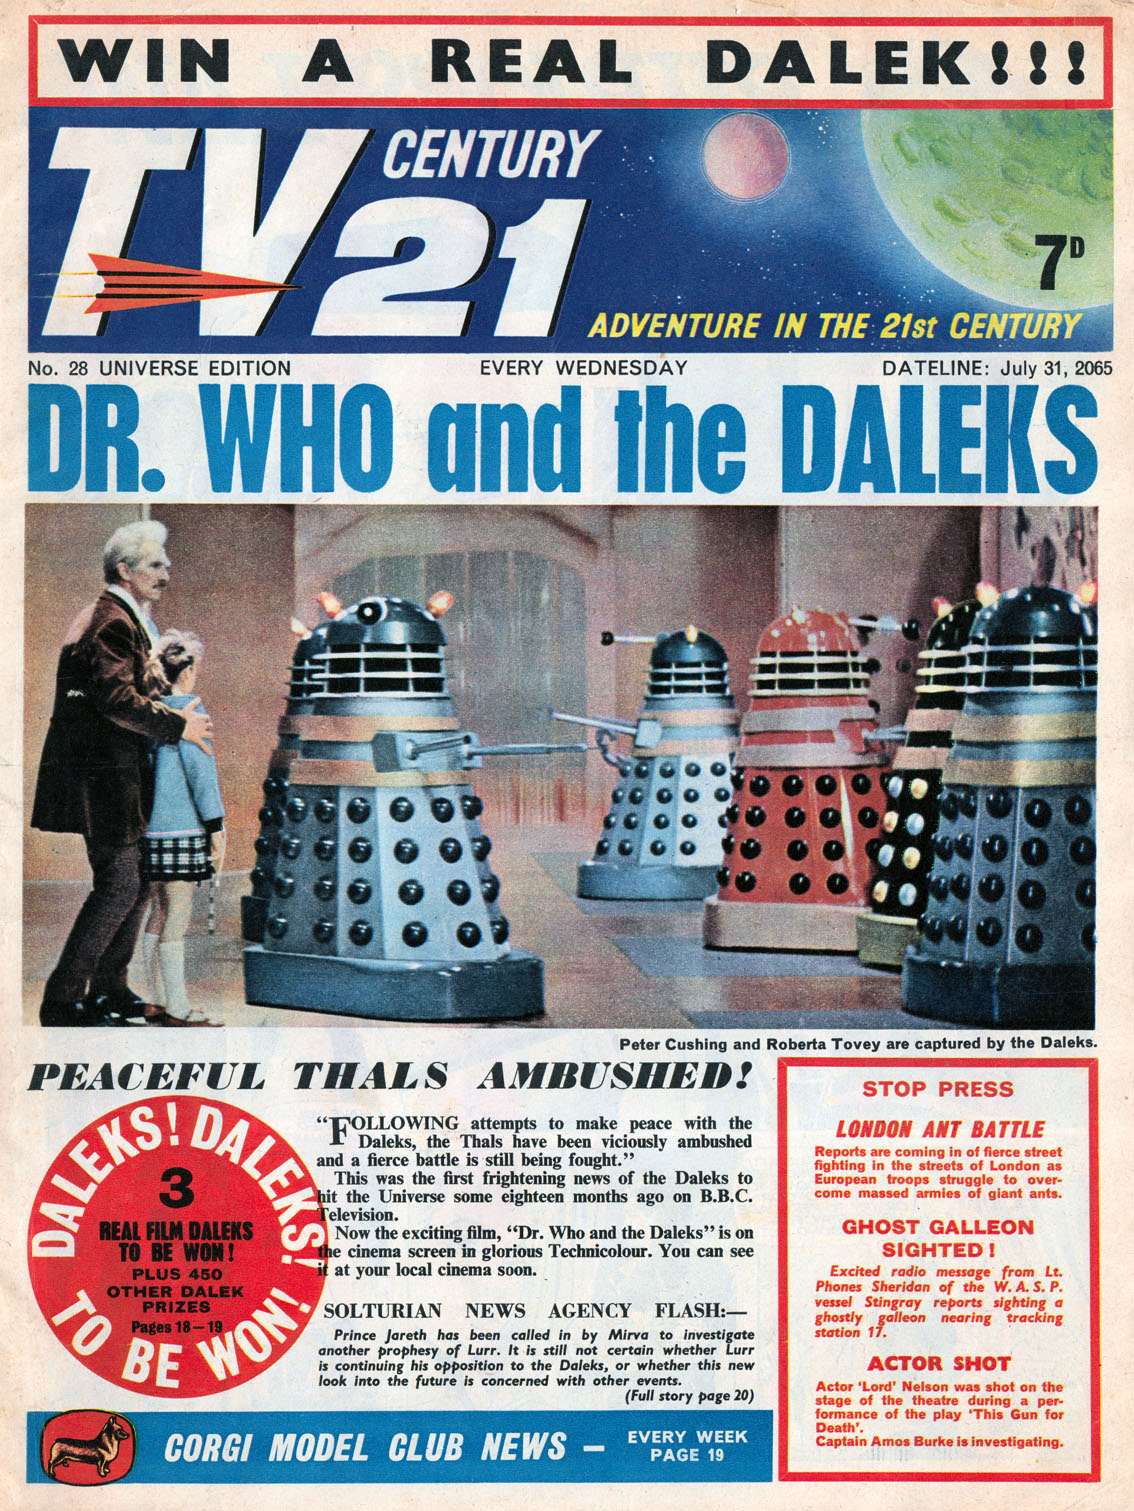 BLIMEY! The Blog of British Comics: Doctor Who in TV21